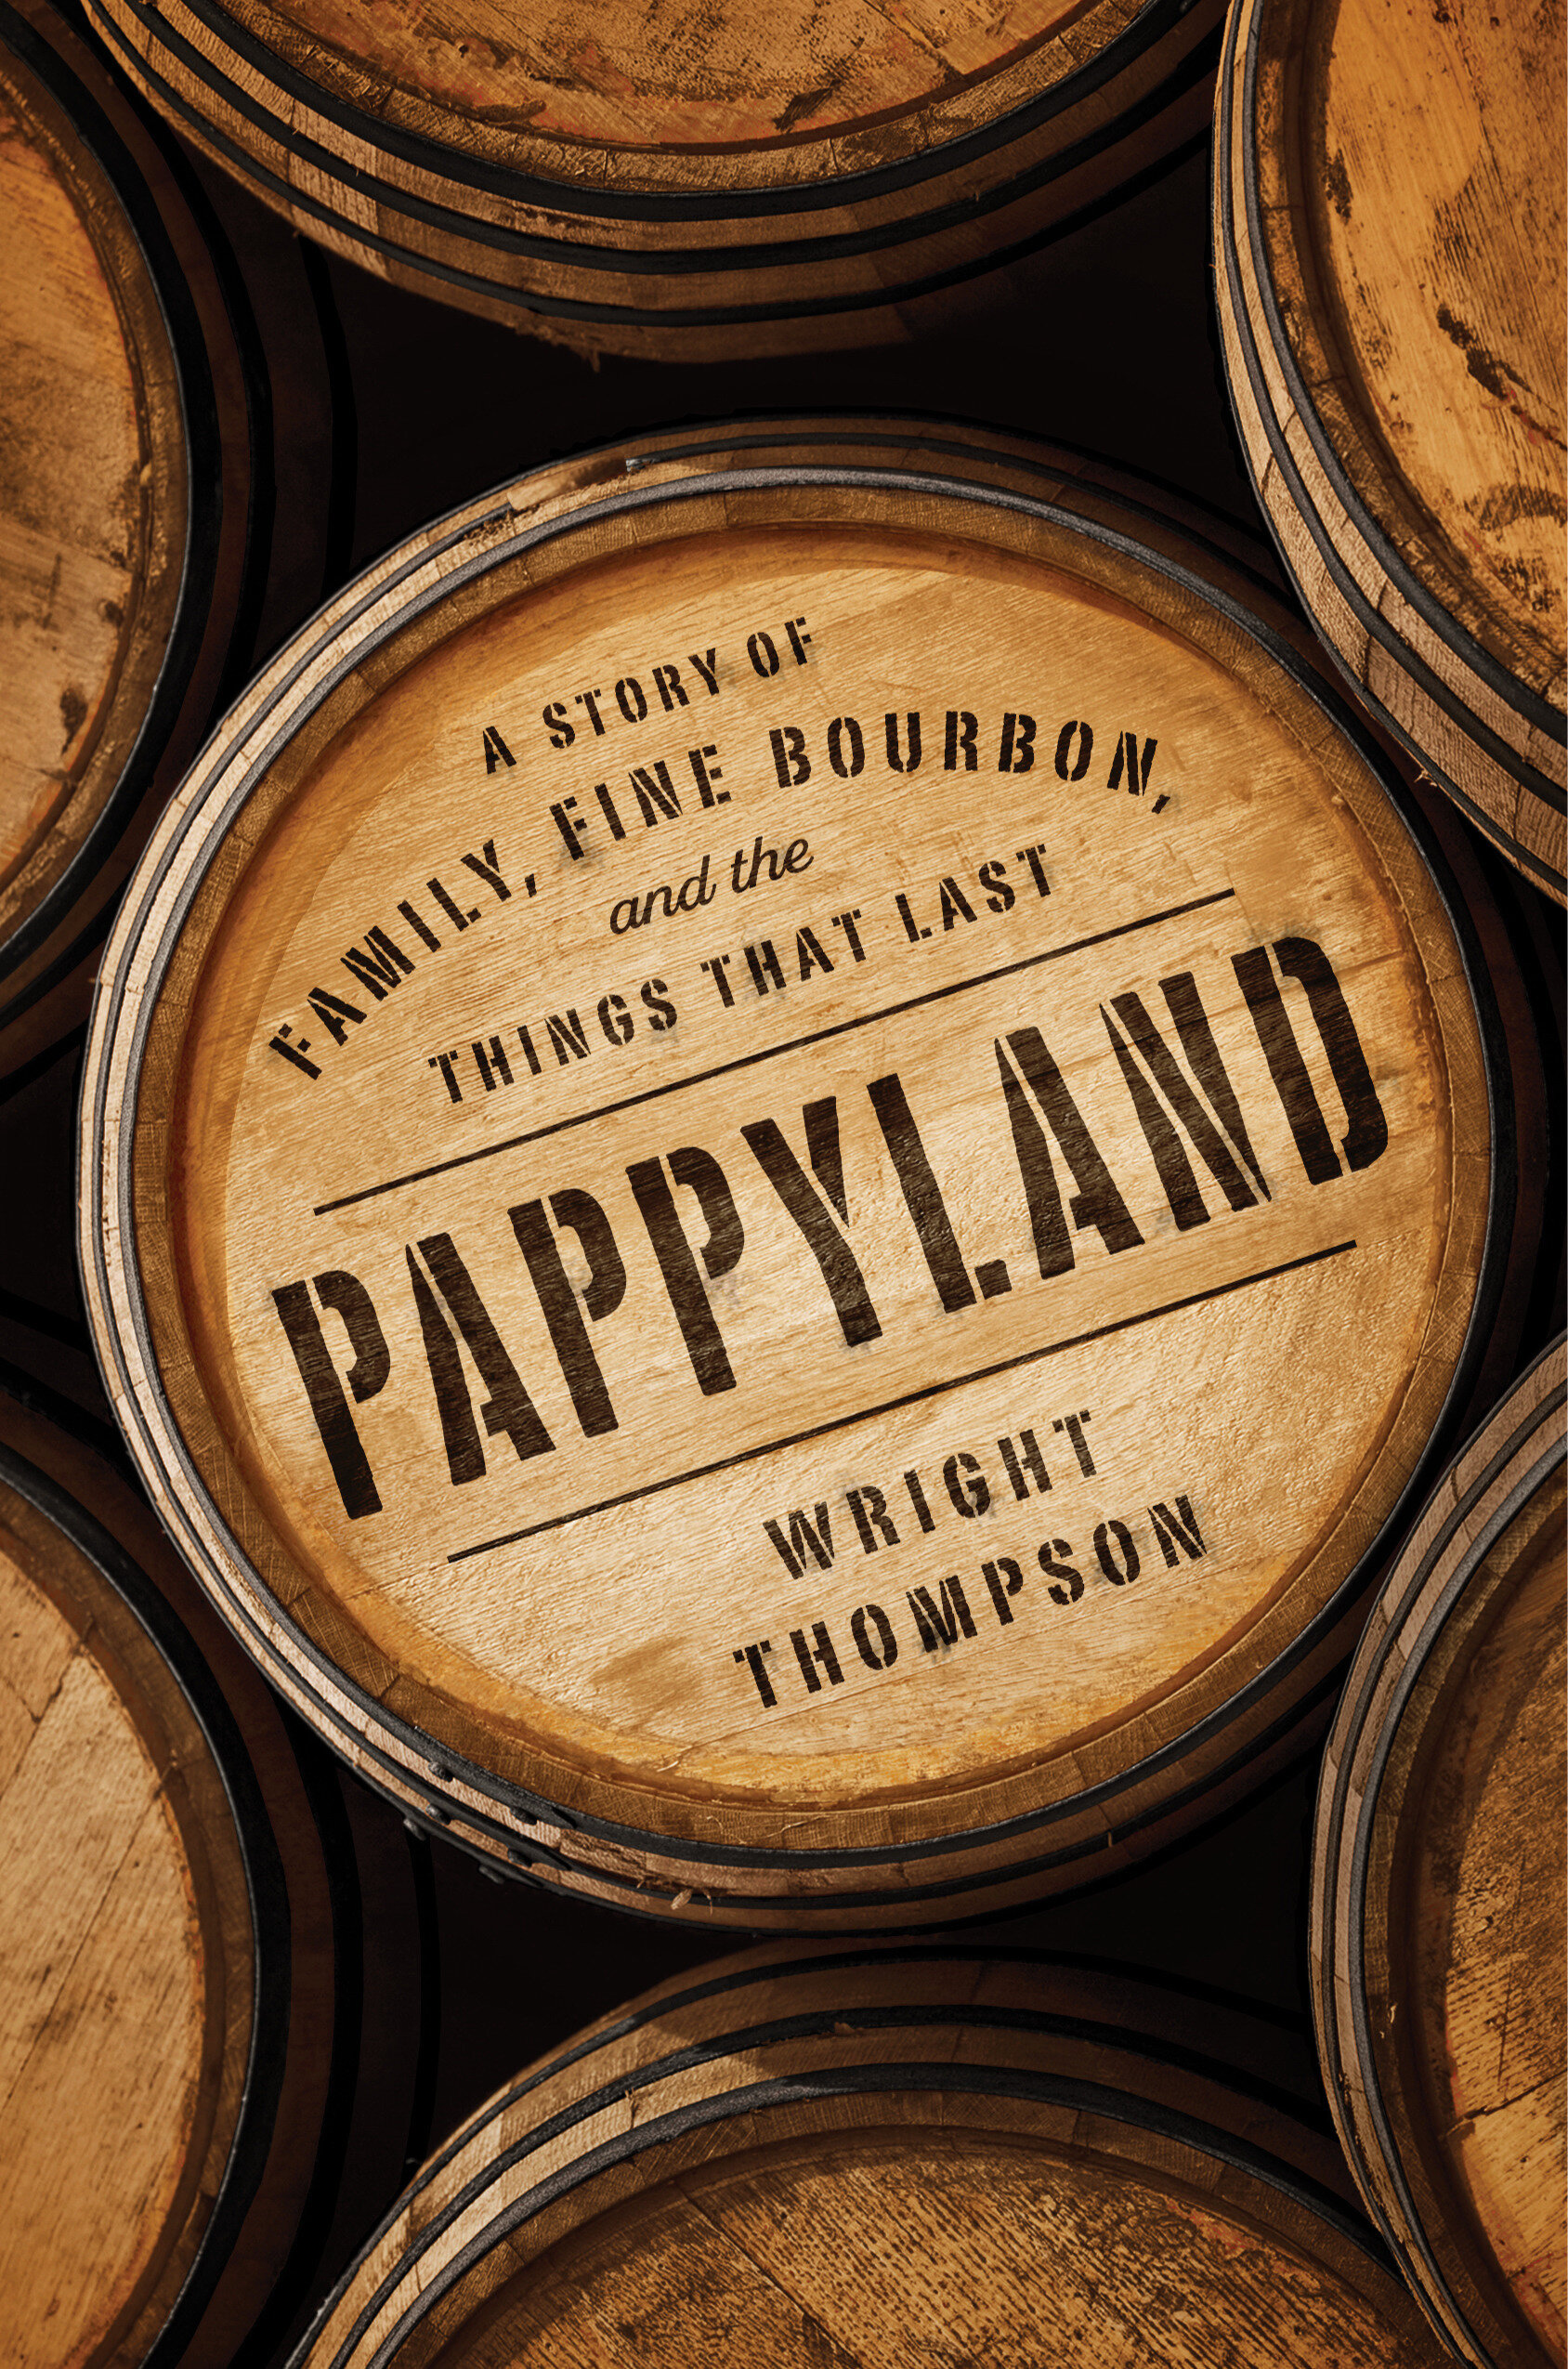 Pappyland: A Story of Family, Fine Bourbon and the Things That Last by Wright Thompson